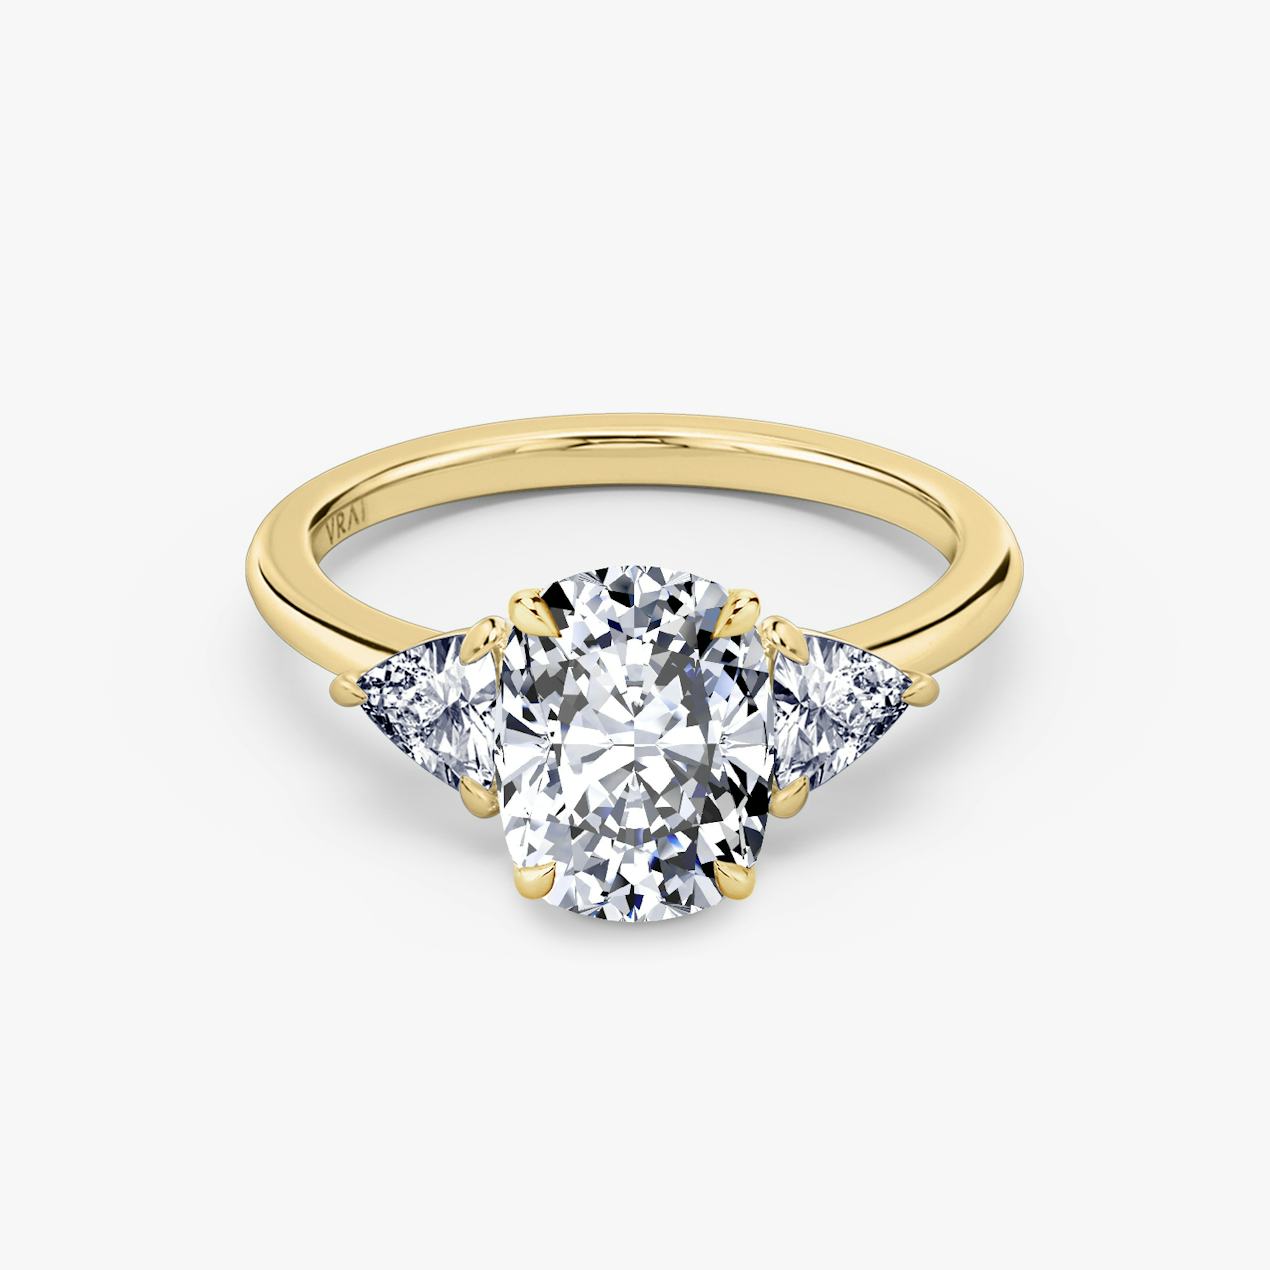 Vintage Inspired Elongated Cushion Cut Rings